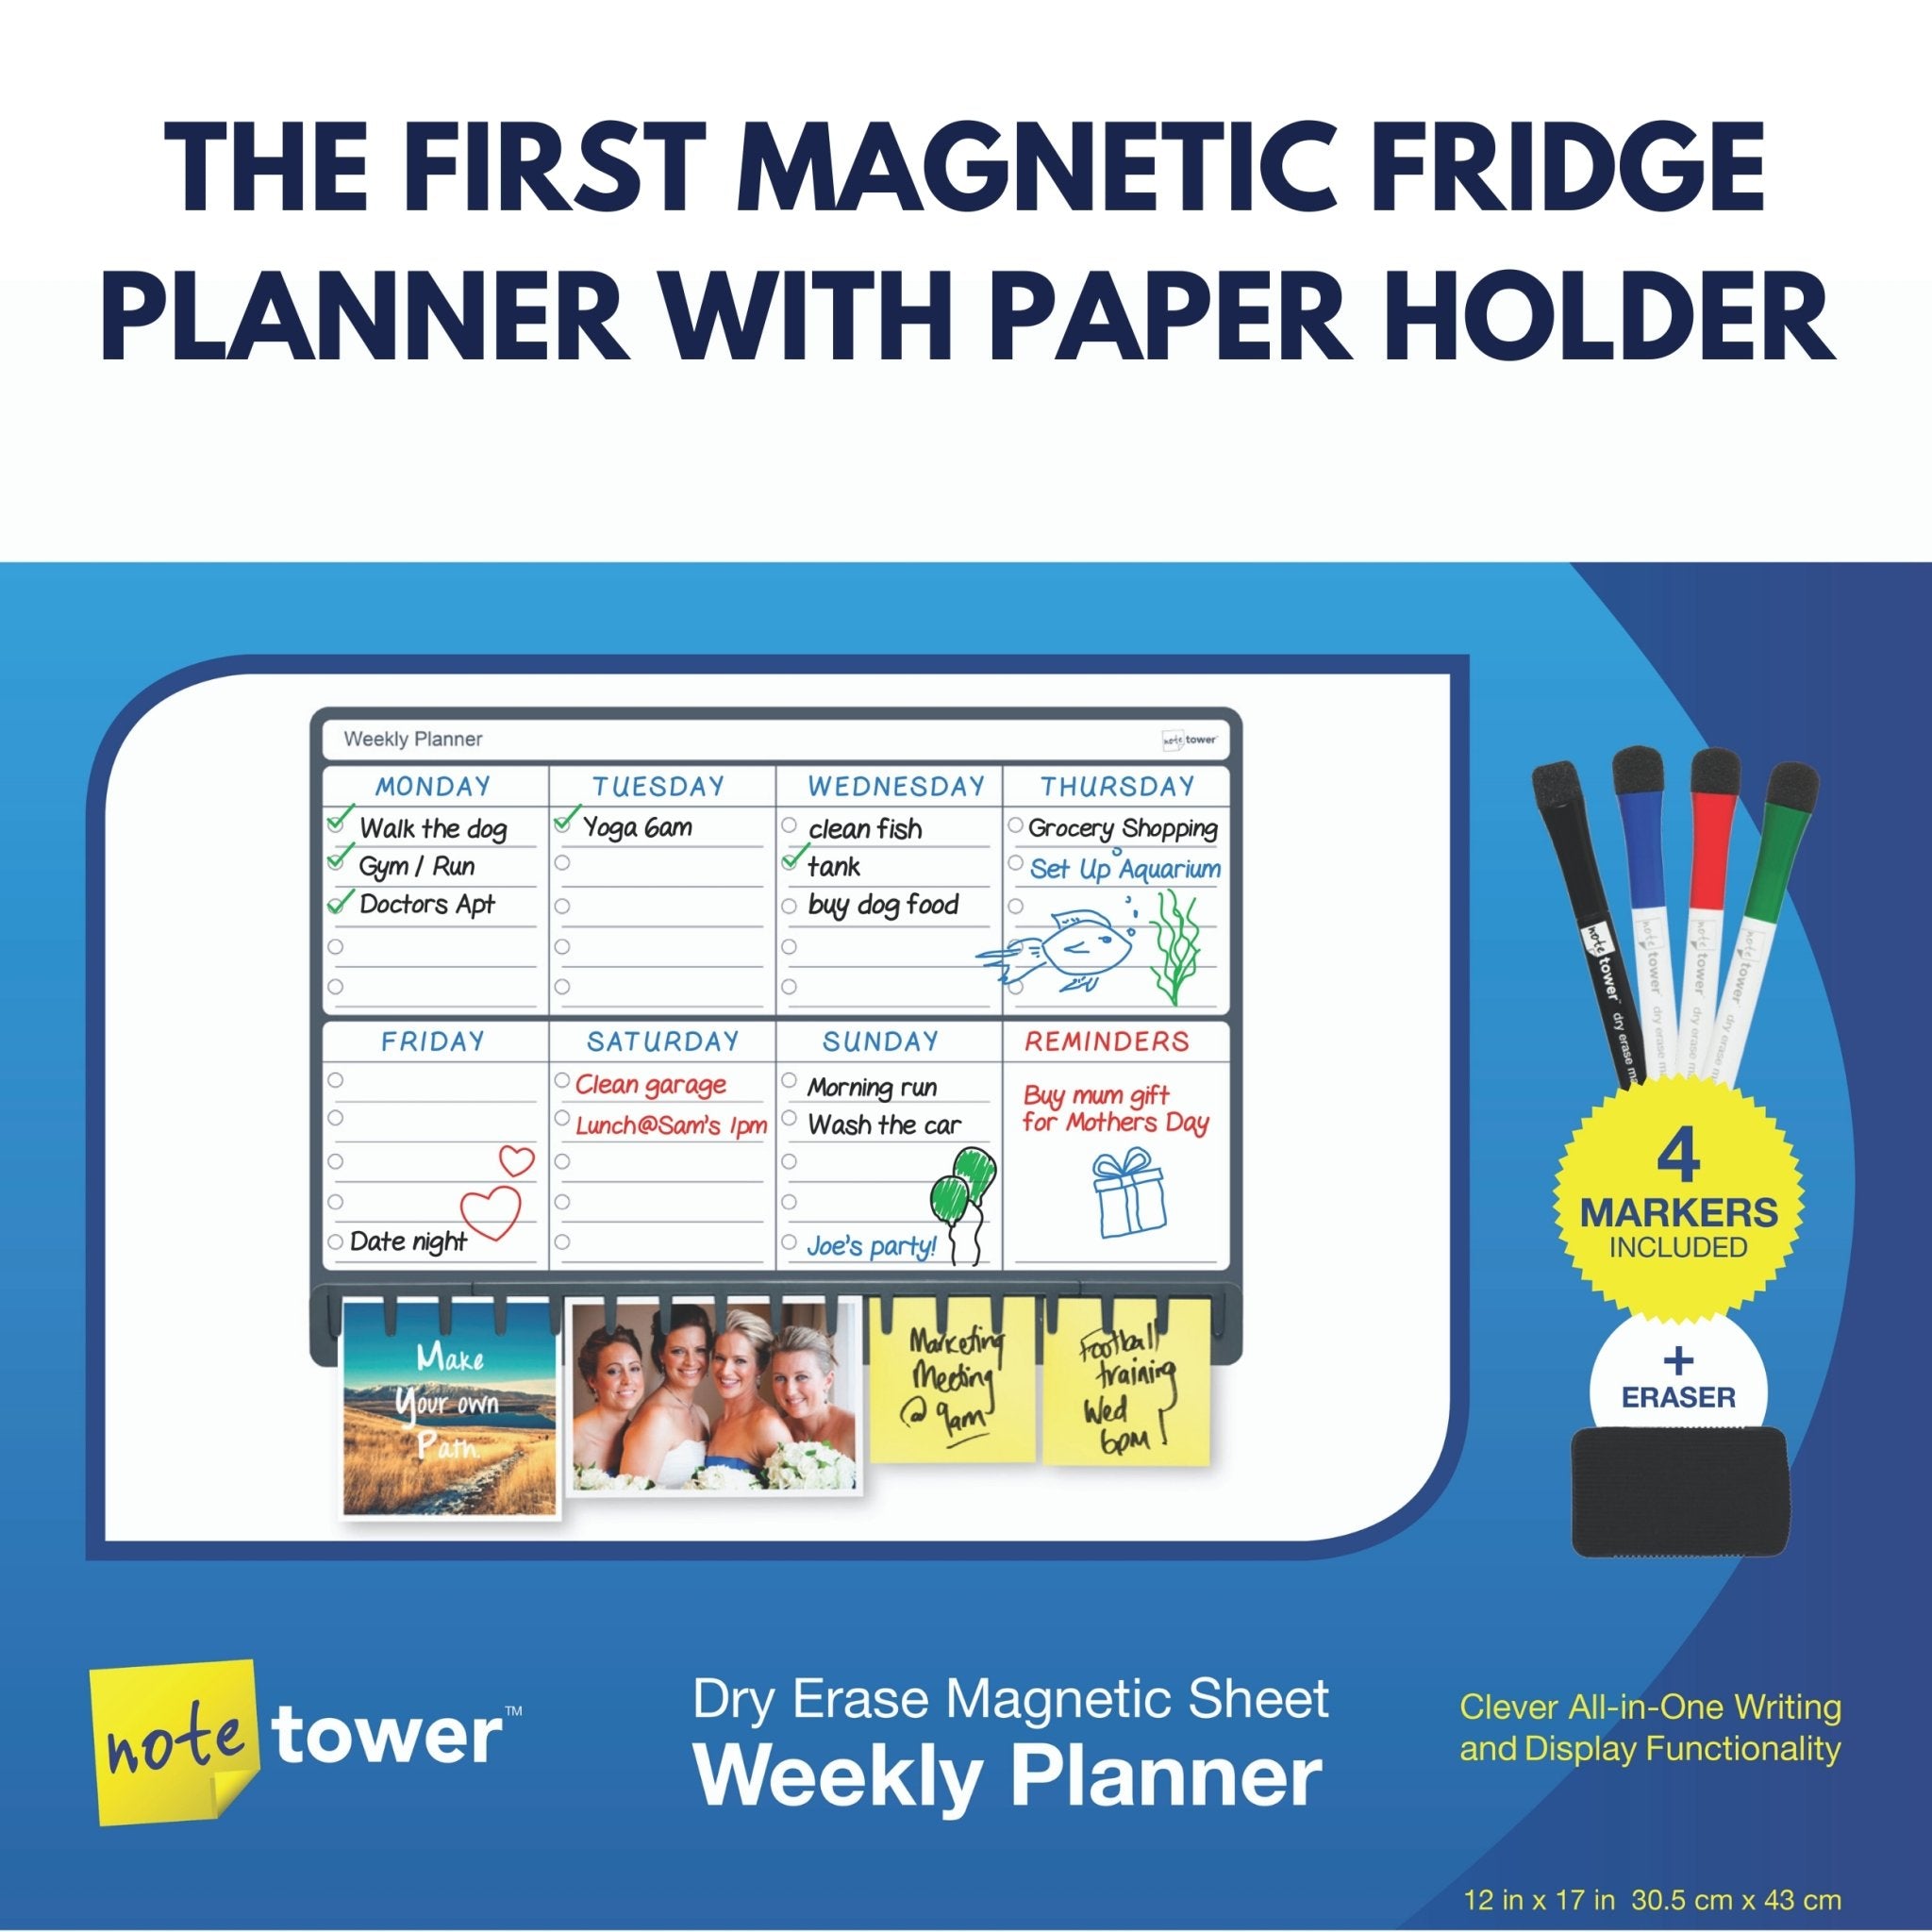 Note Tower 12" x 17" Magnet Combination Board - Weekly Planner - NOTETOWER LLC.